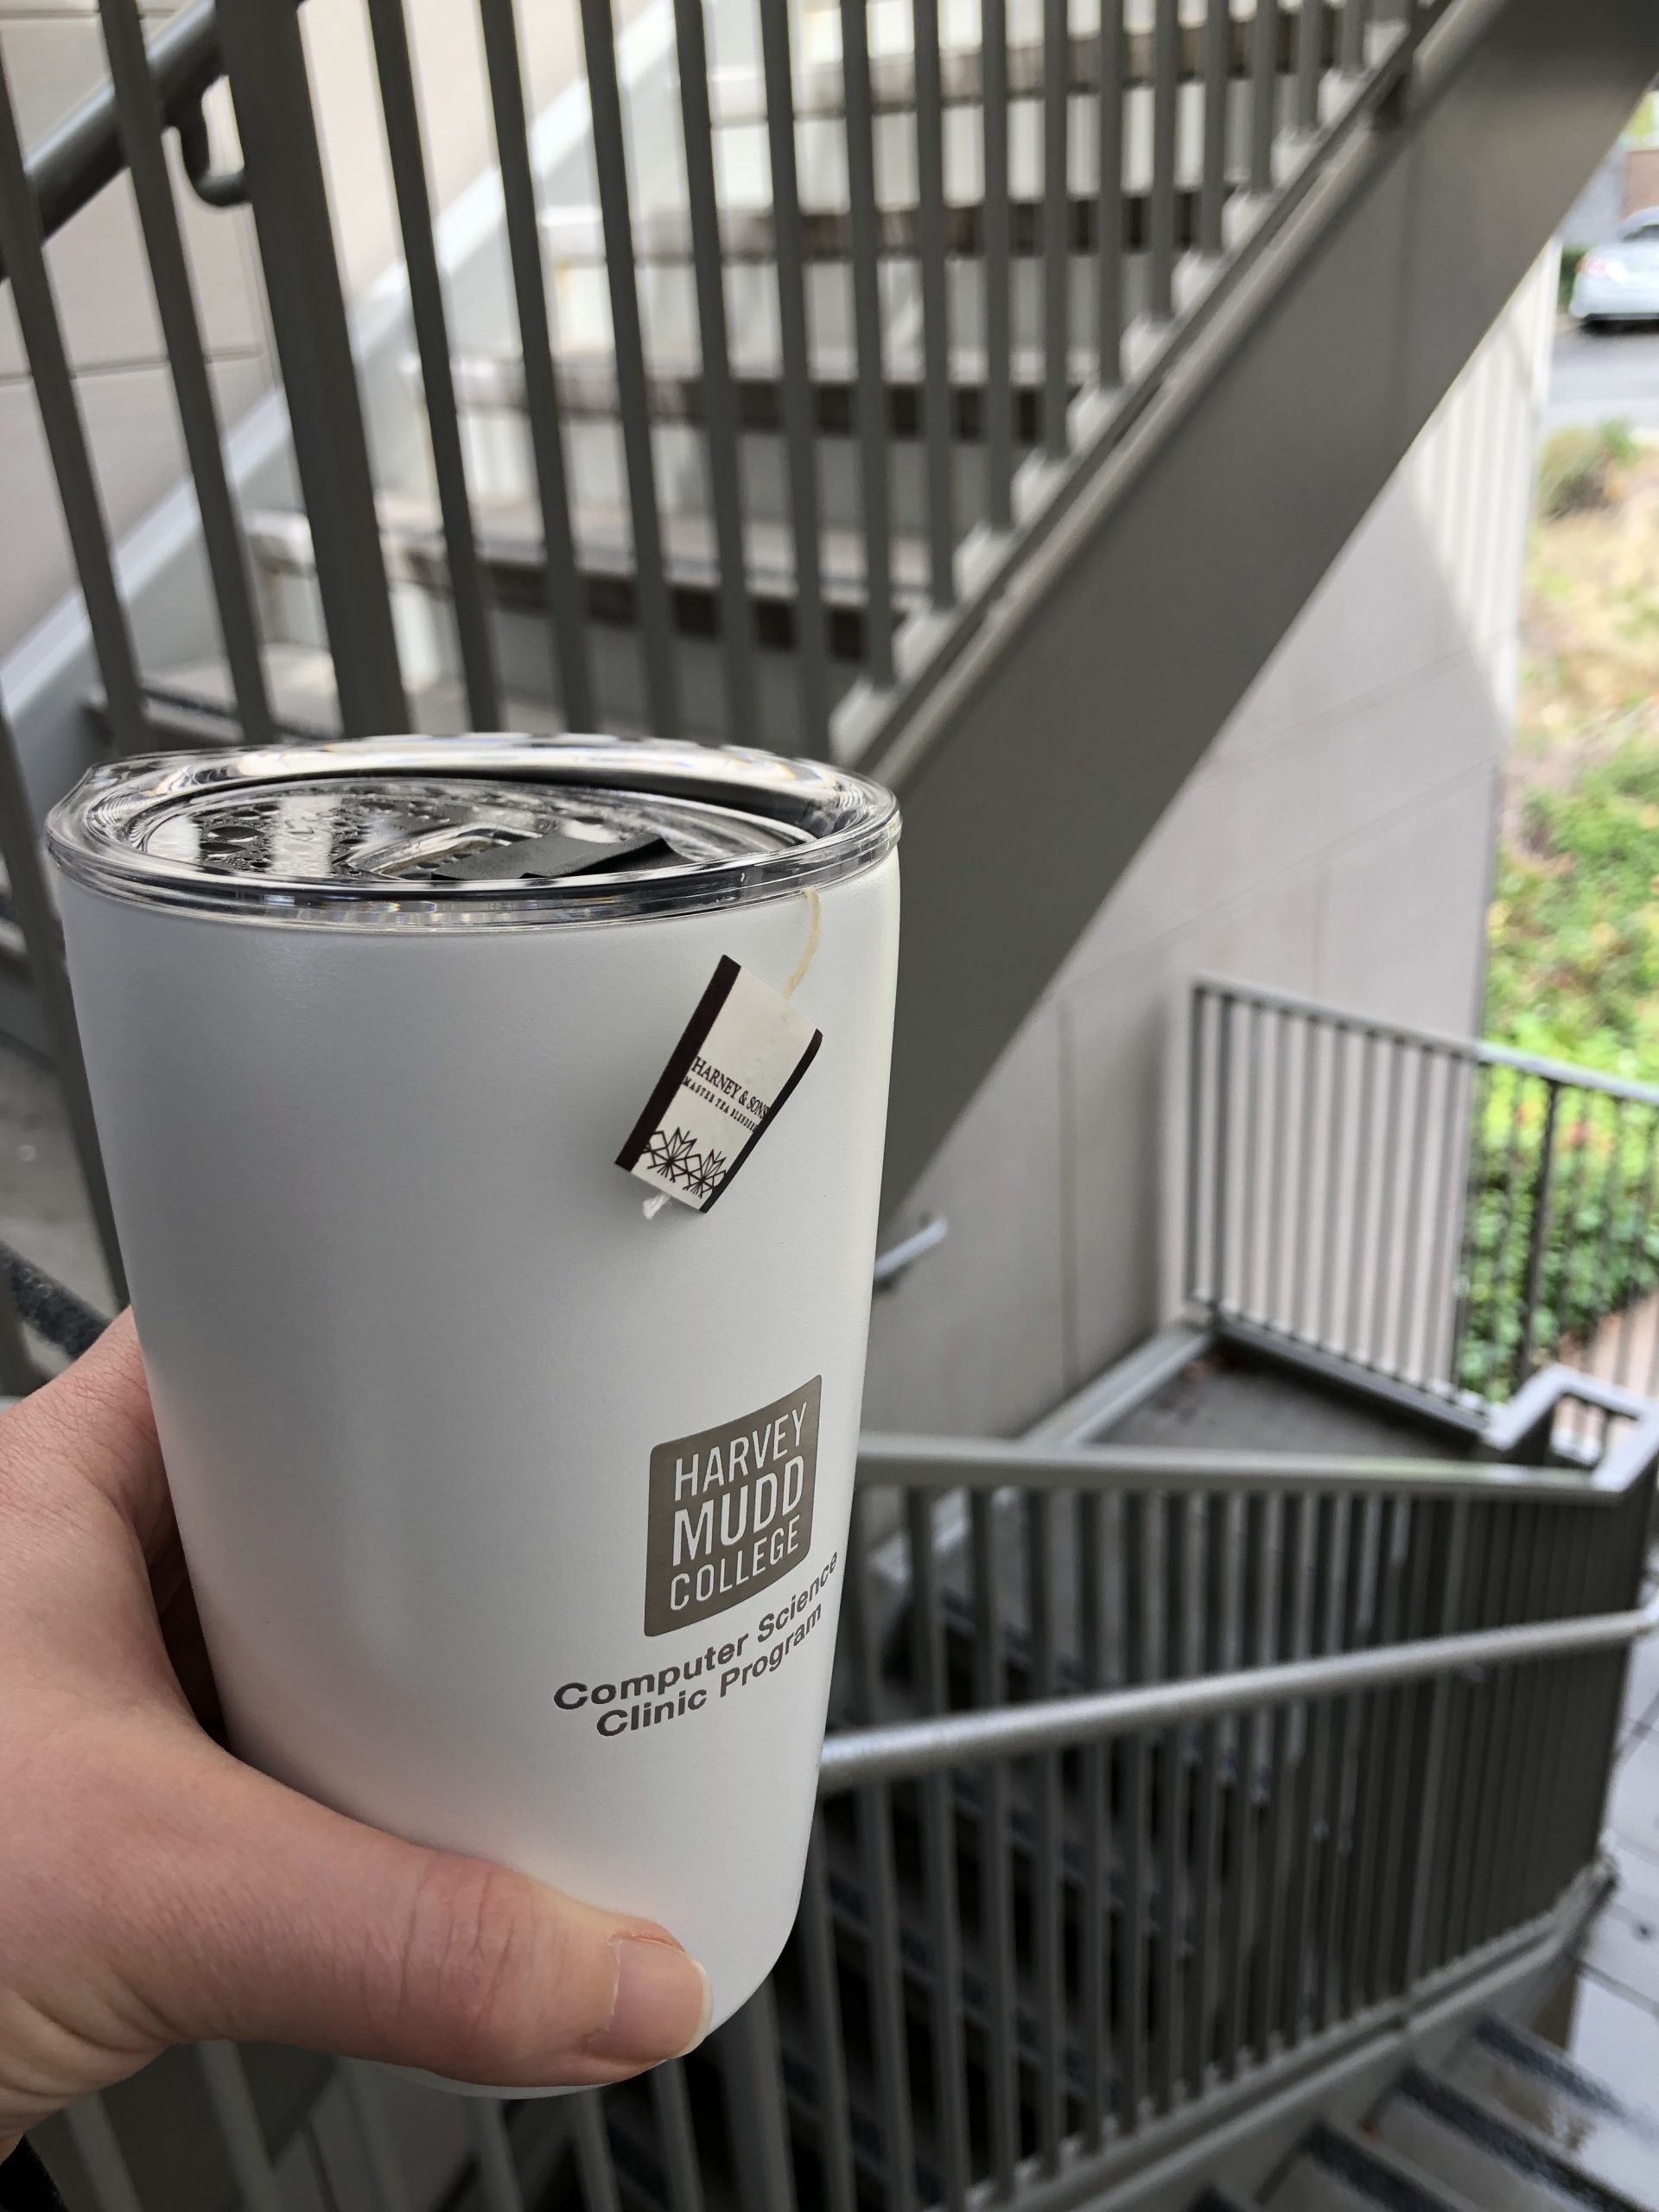 Hand holding thermos with print "Harvey Mudd College Computer Science Clinic Program"